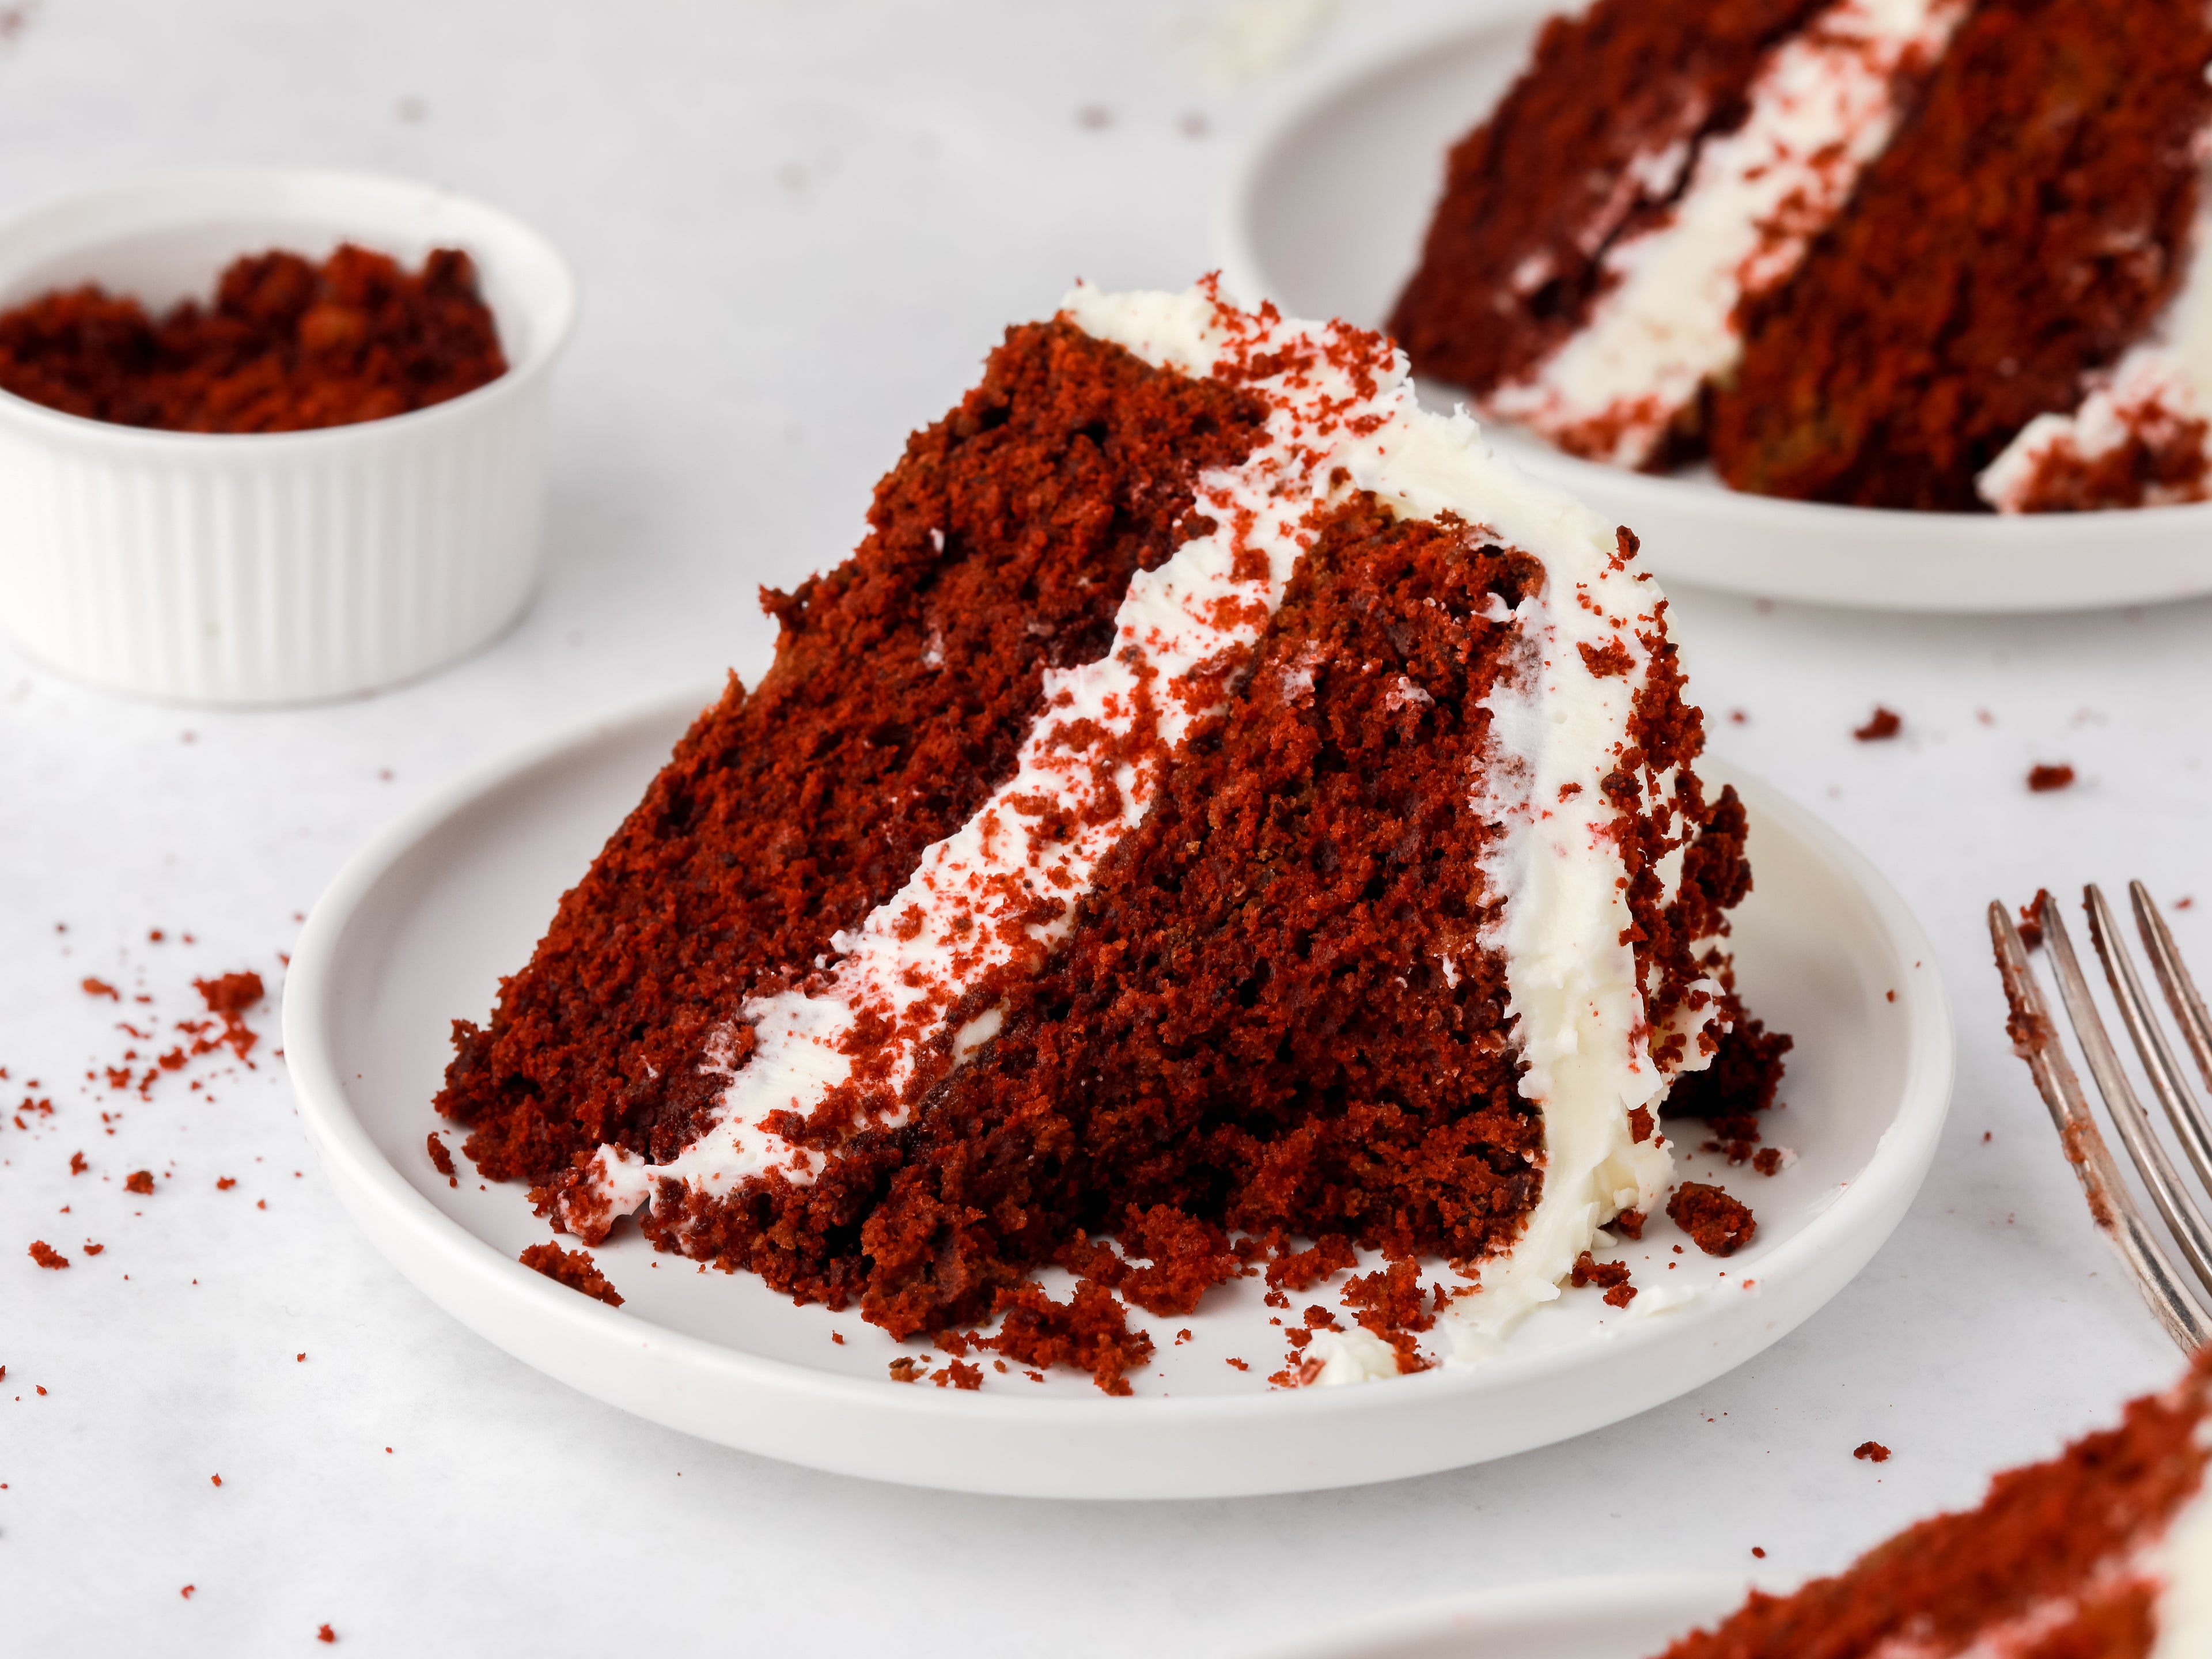 Close up of a slice of red velvet cake on a plate with a bite taken out of it